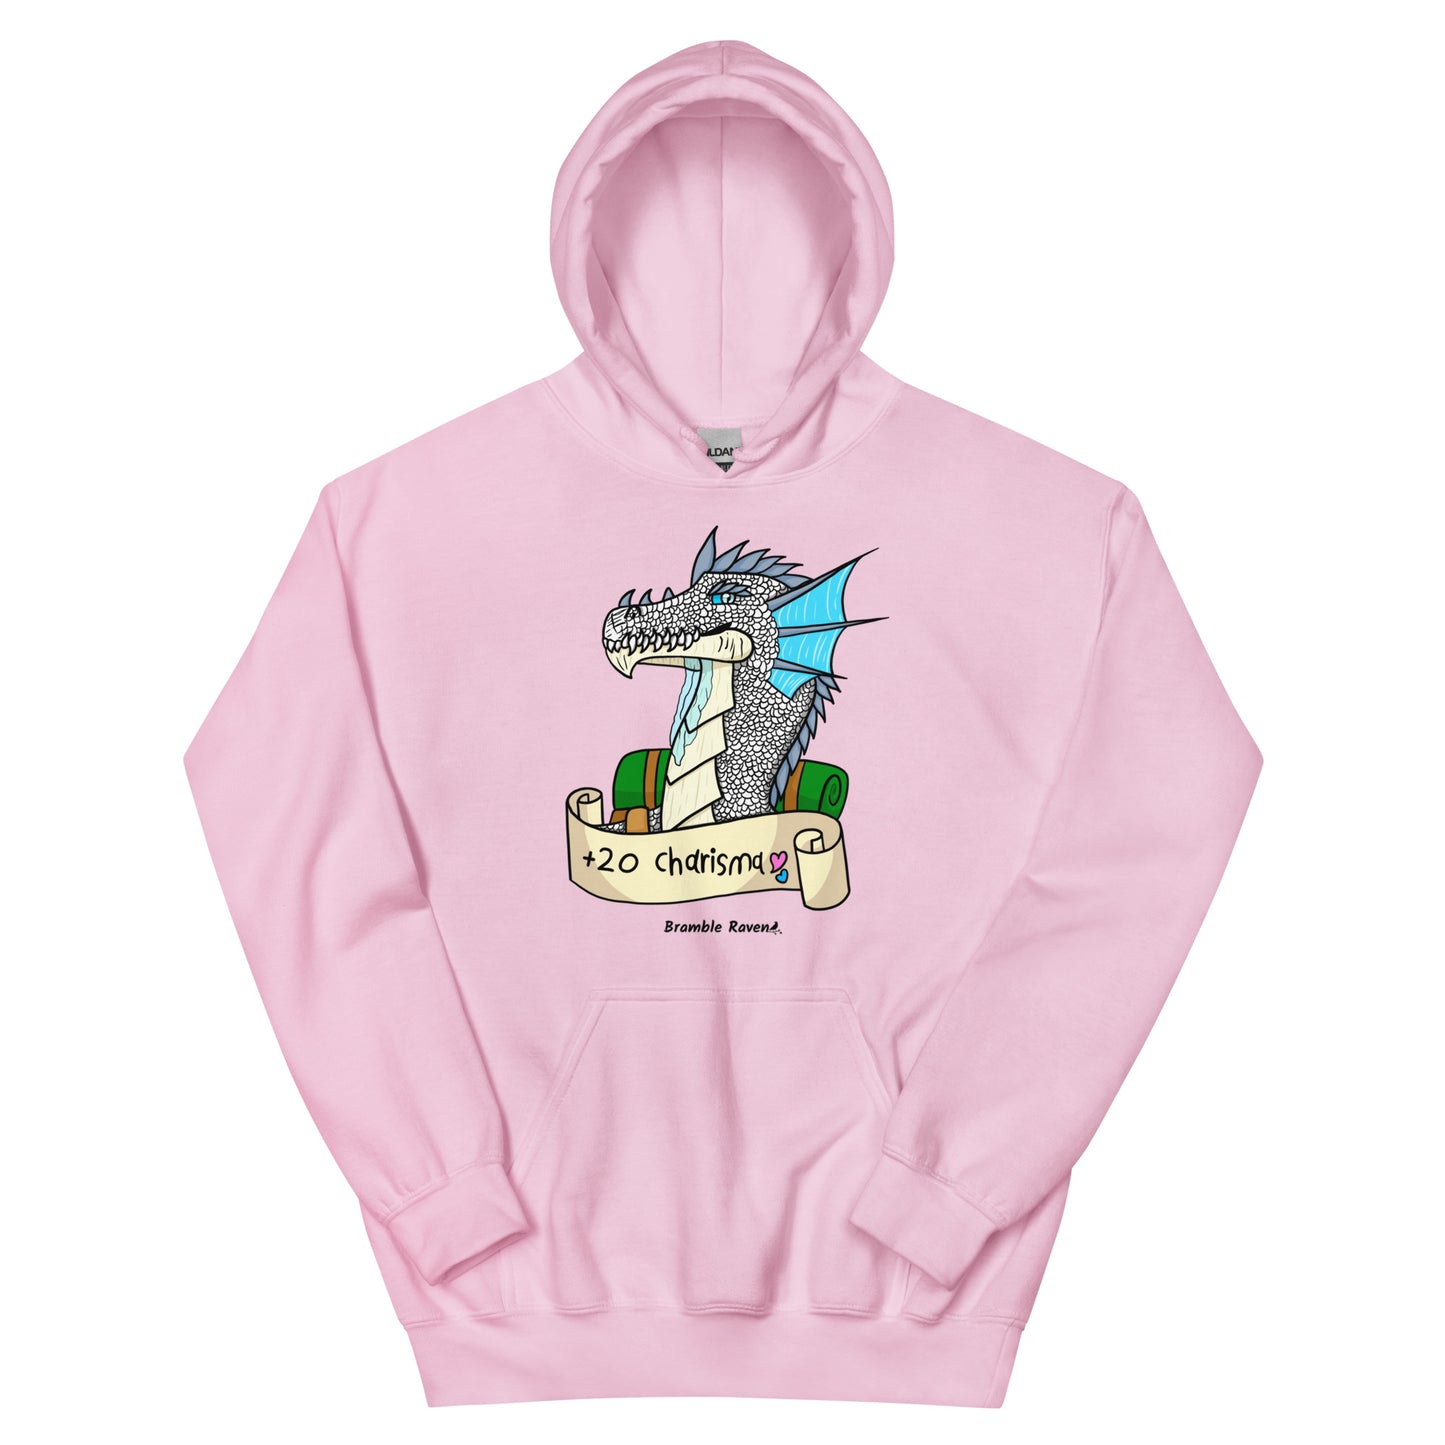 Original Bicycle the Bard dragon +20 Charisma design on unisex light pink colored hoodie.